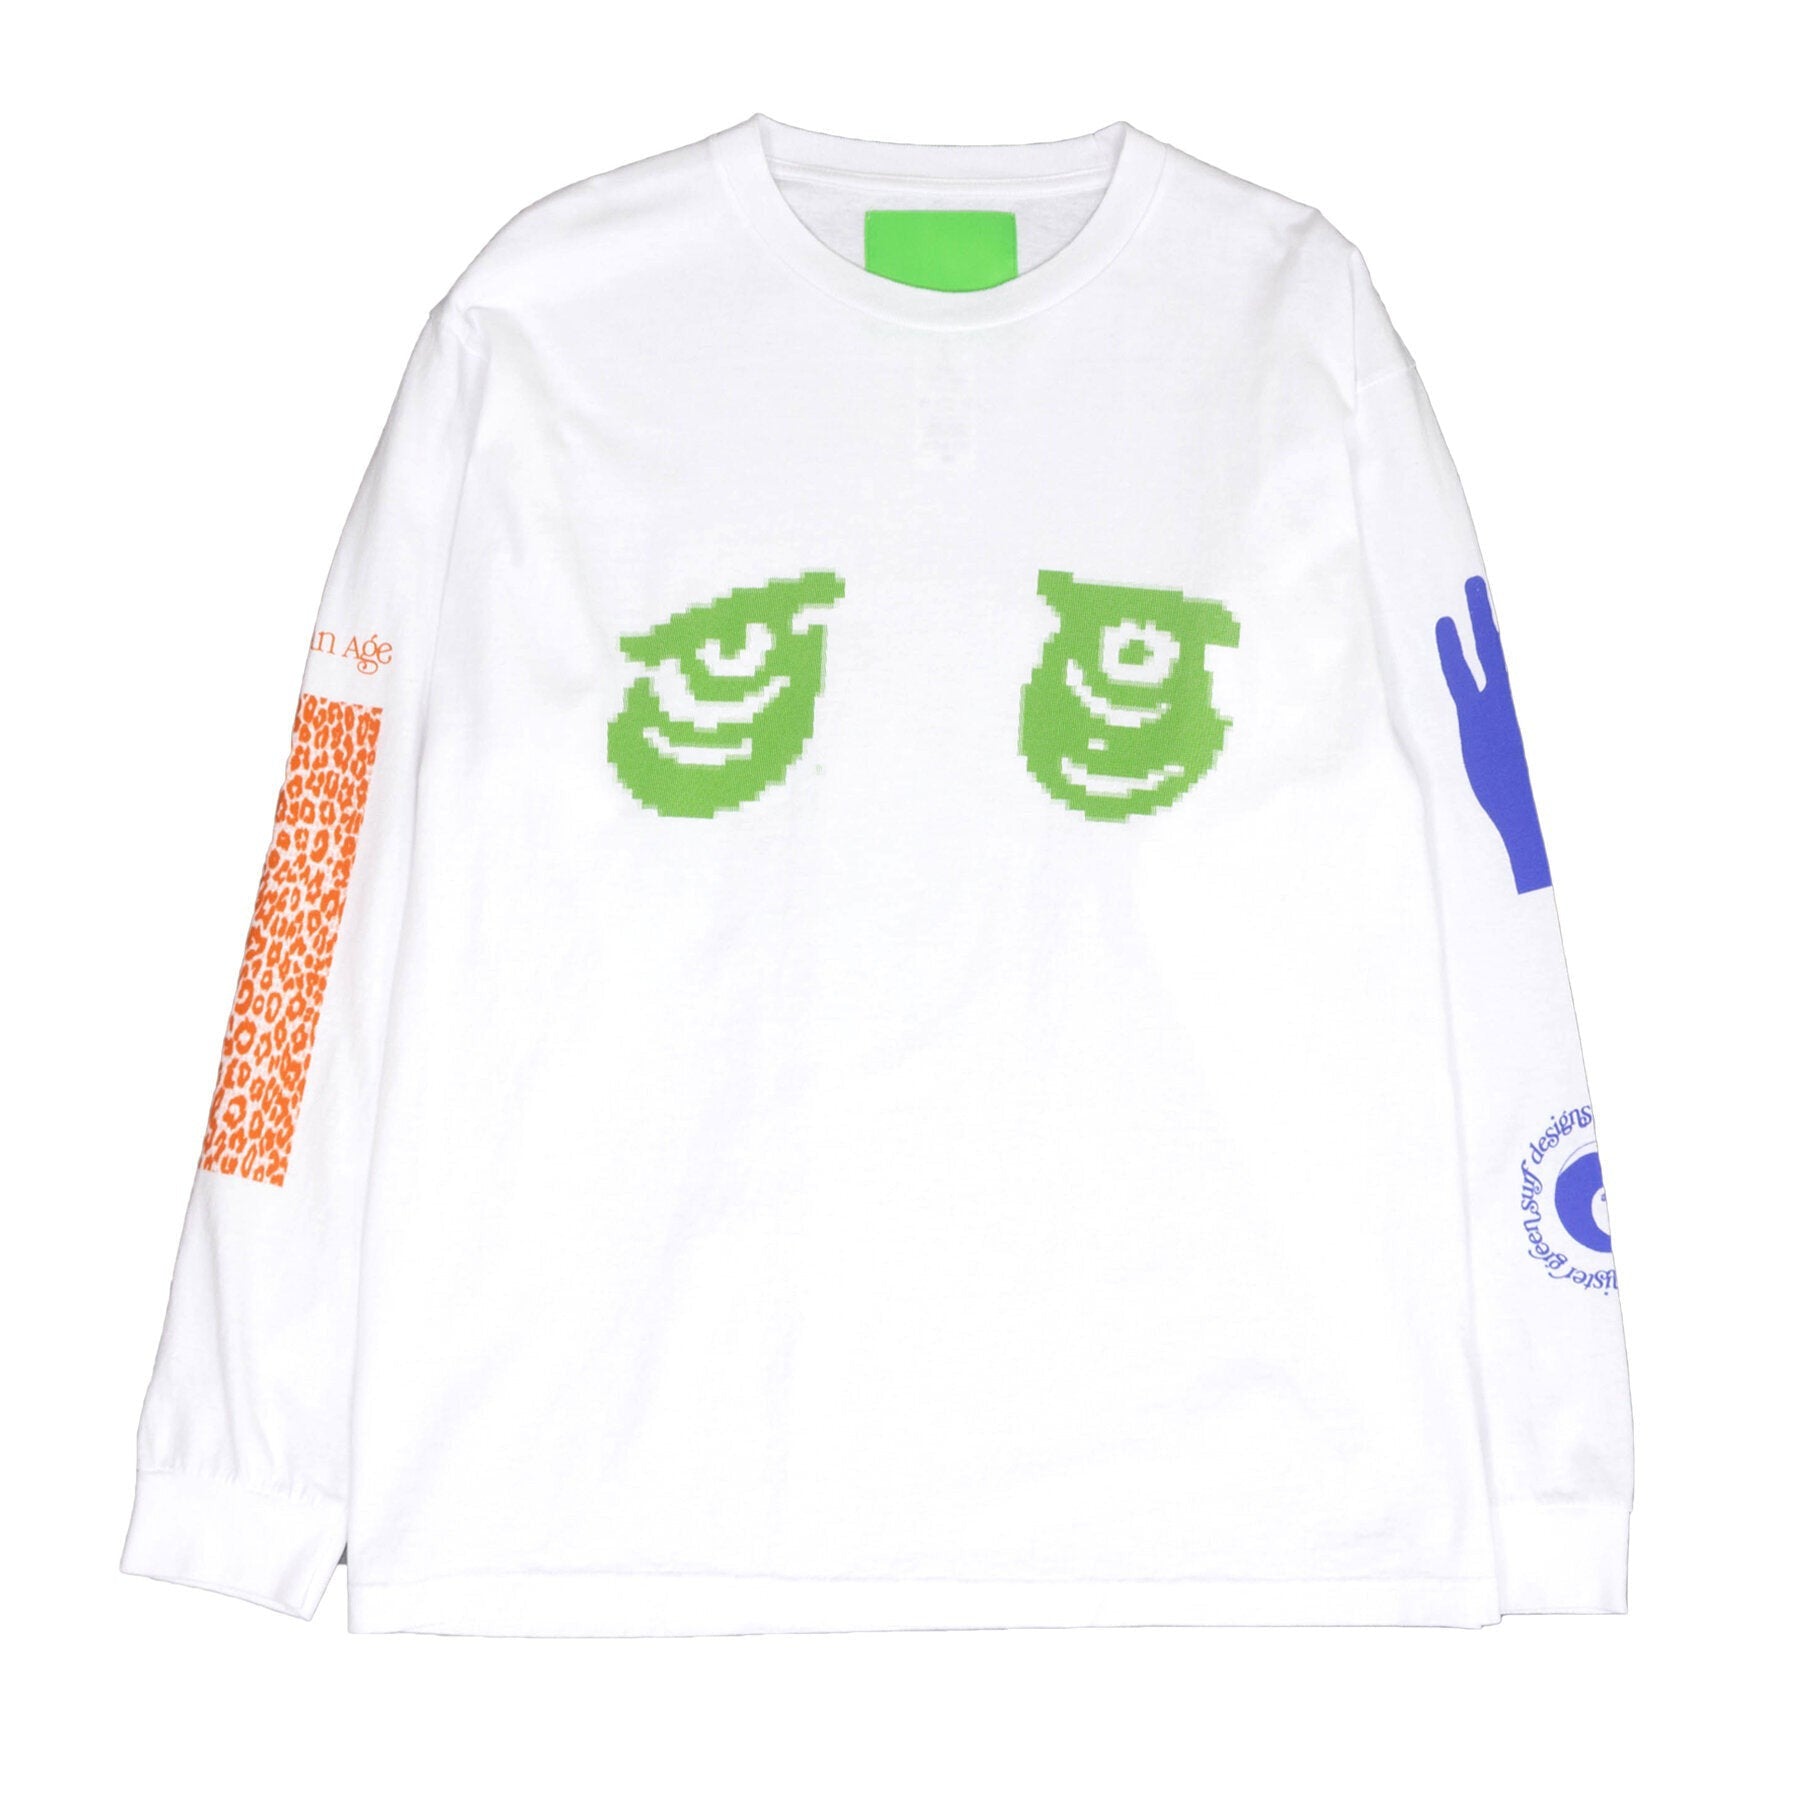 Aquarian Collage L/S Tee - White-Mister Green-Mister Green